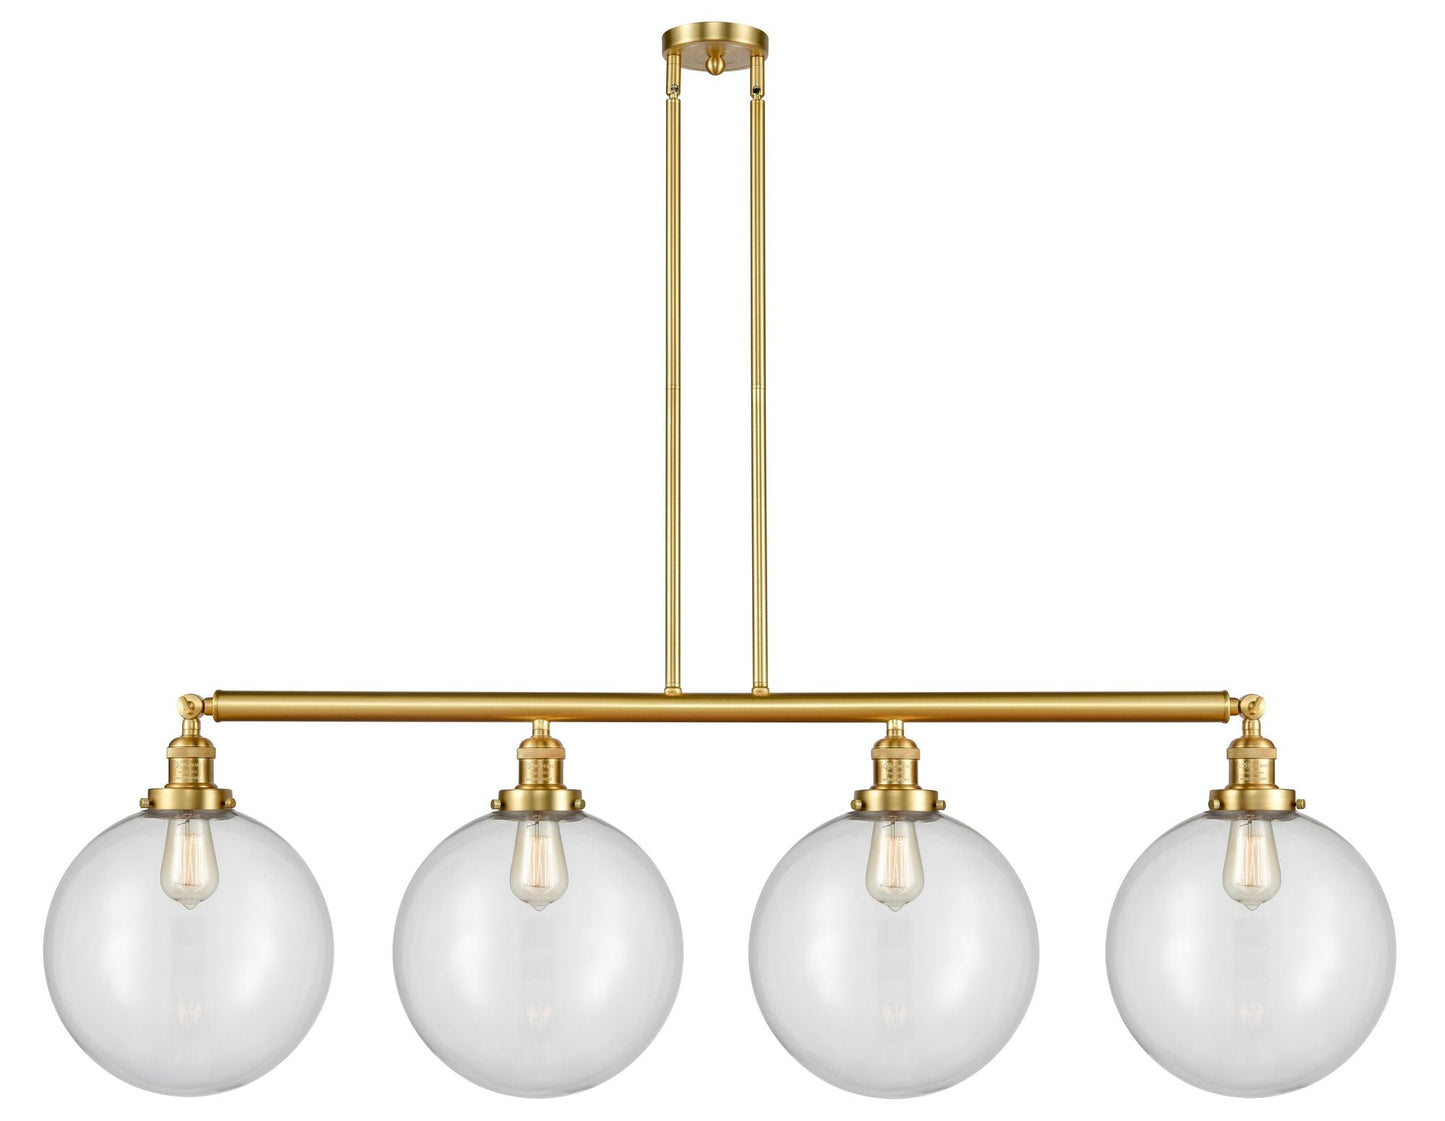 214-SG-G202-12 4-Light 56" Satin Gold Island Light - Clear Beacon Glass - LED Bulb - Dimmensions: 56 x 12 x 16<br>Minimum Height : 26<br>Maximum Height : 50 - Sloped Ceiling Compatible: Yes